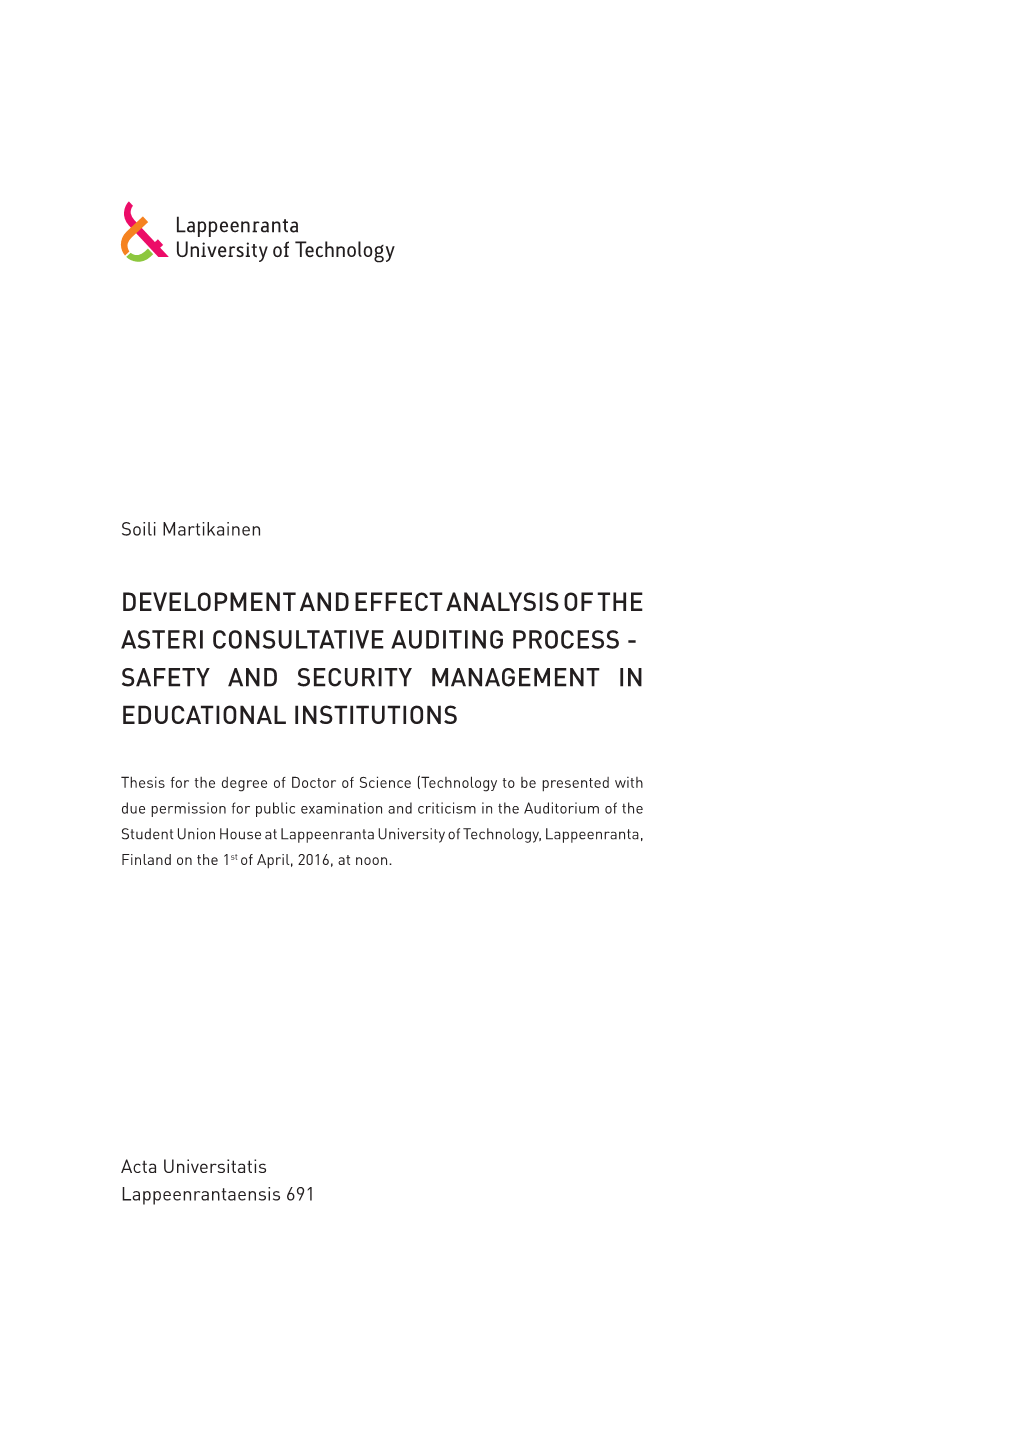 Development and Effect Analysis of the Asteri Consultative Auditing Process - Safety and Security Management in Educational Institutions